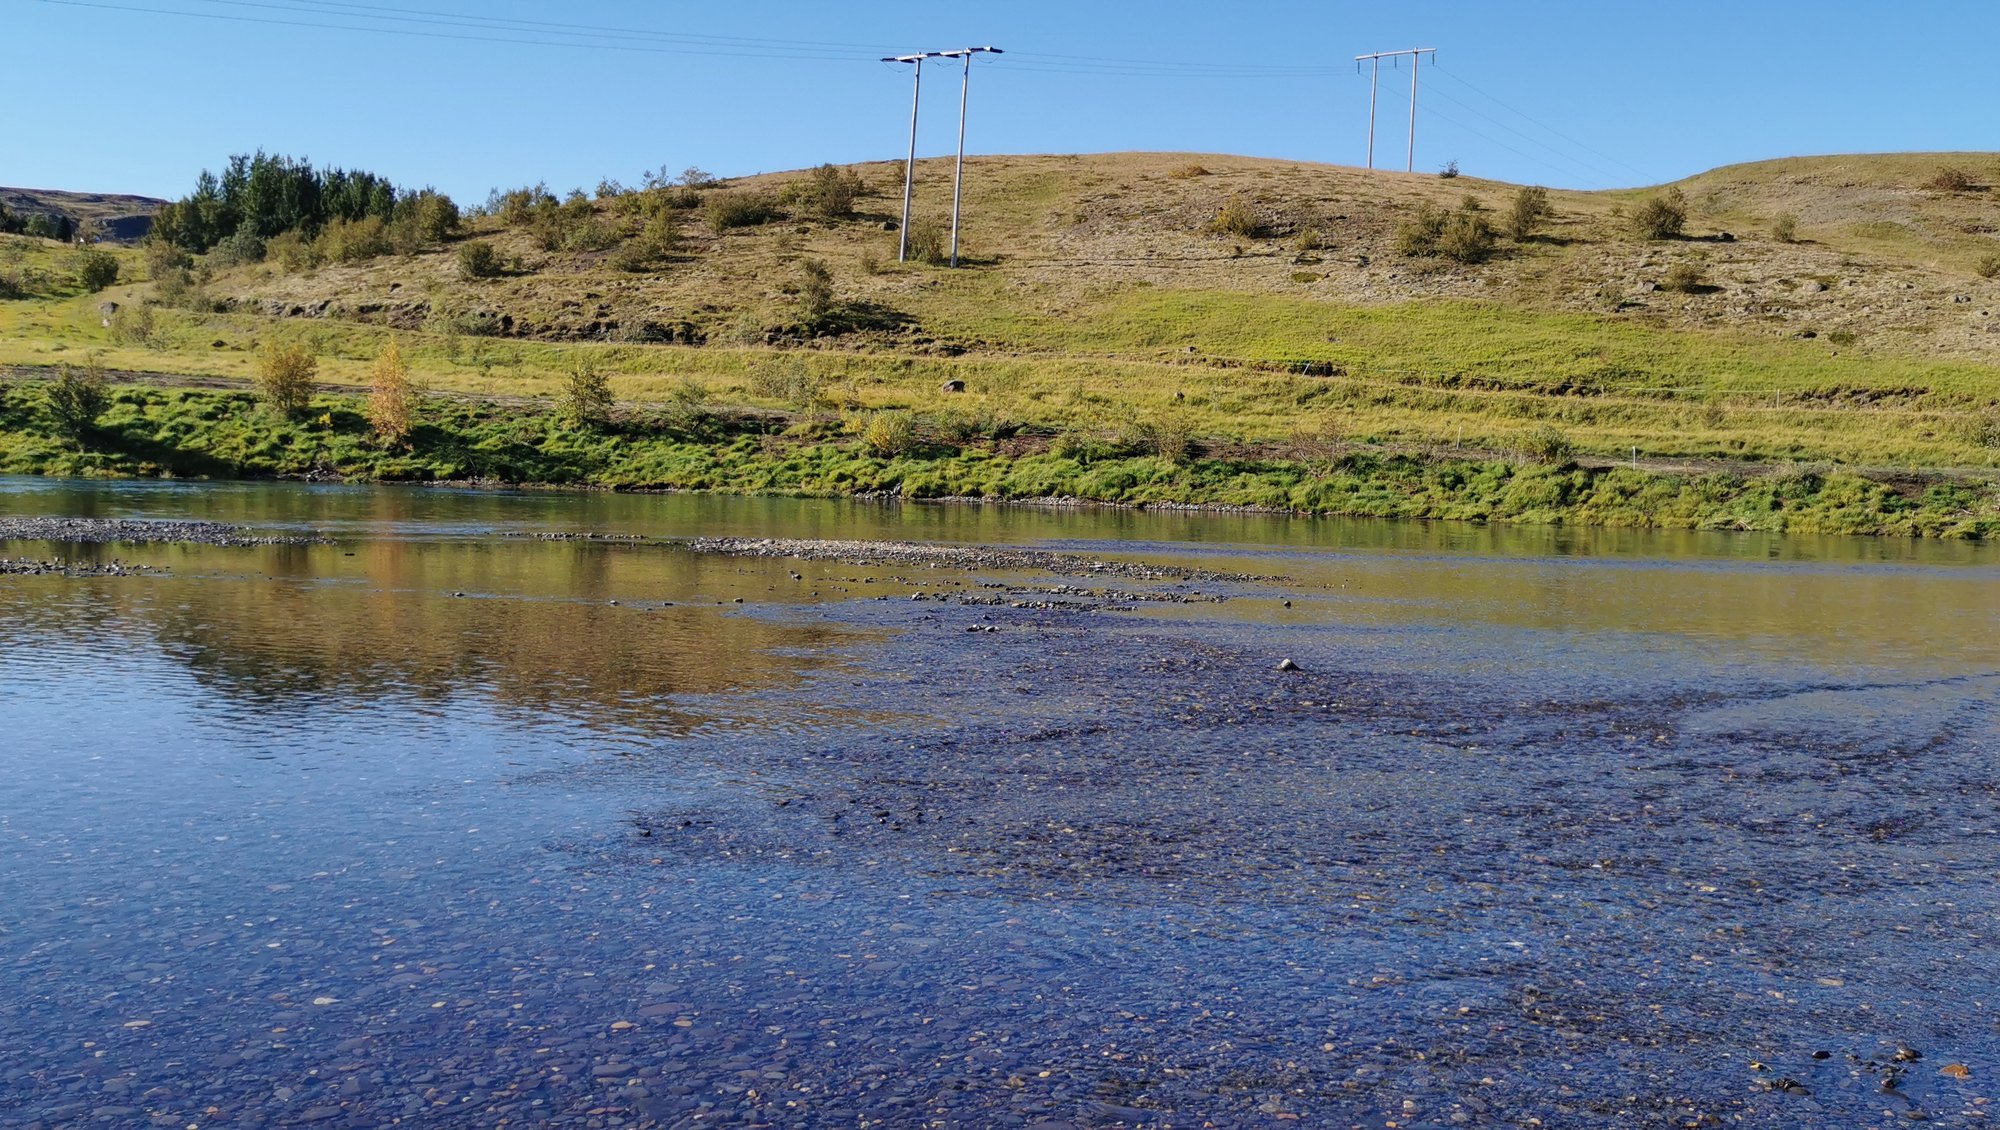 In the foreground is blue water, the restored bank. Behind it are green hills, on which a couple of power cables are hanging in the air. In the very background is the blue sky with no clouds.